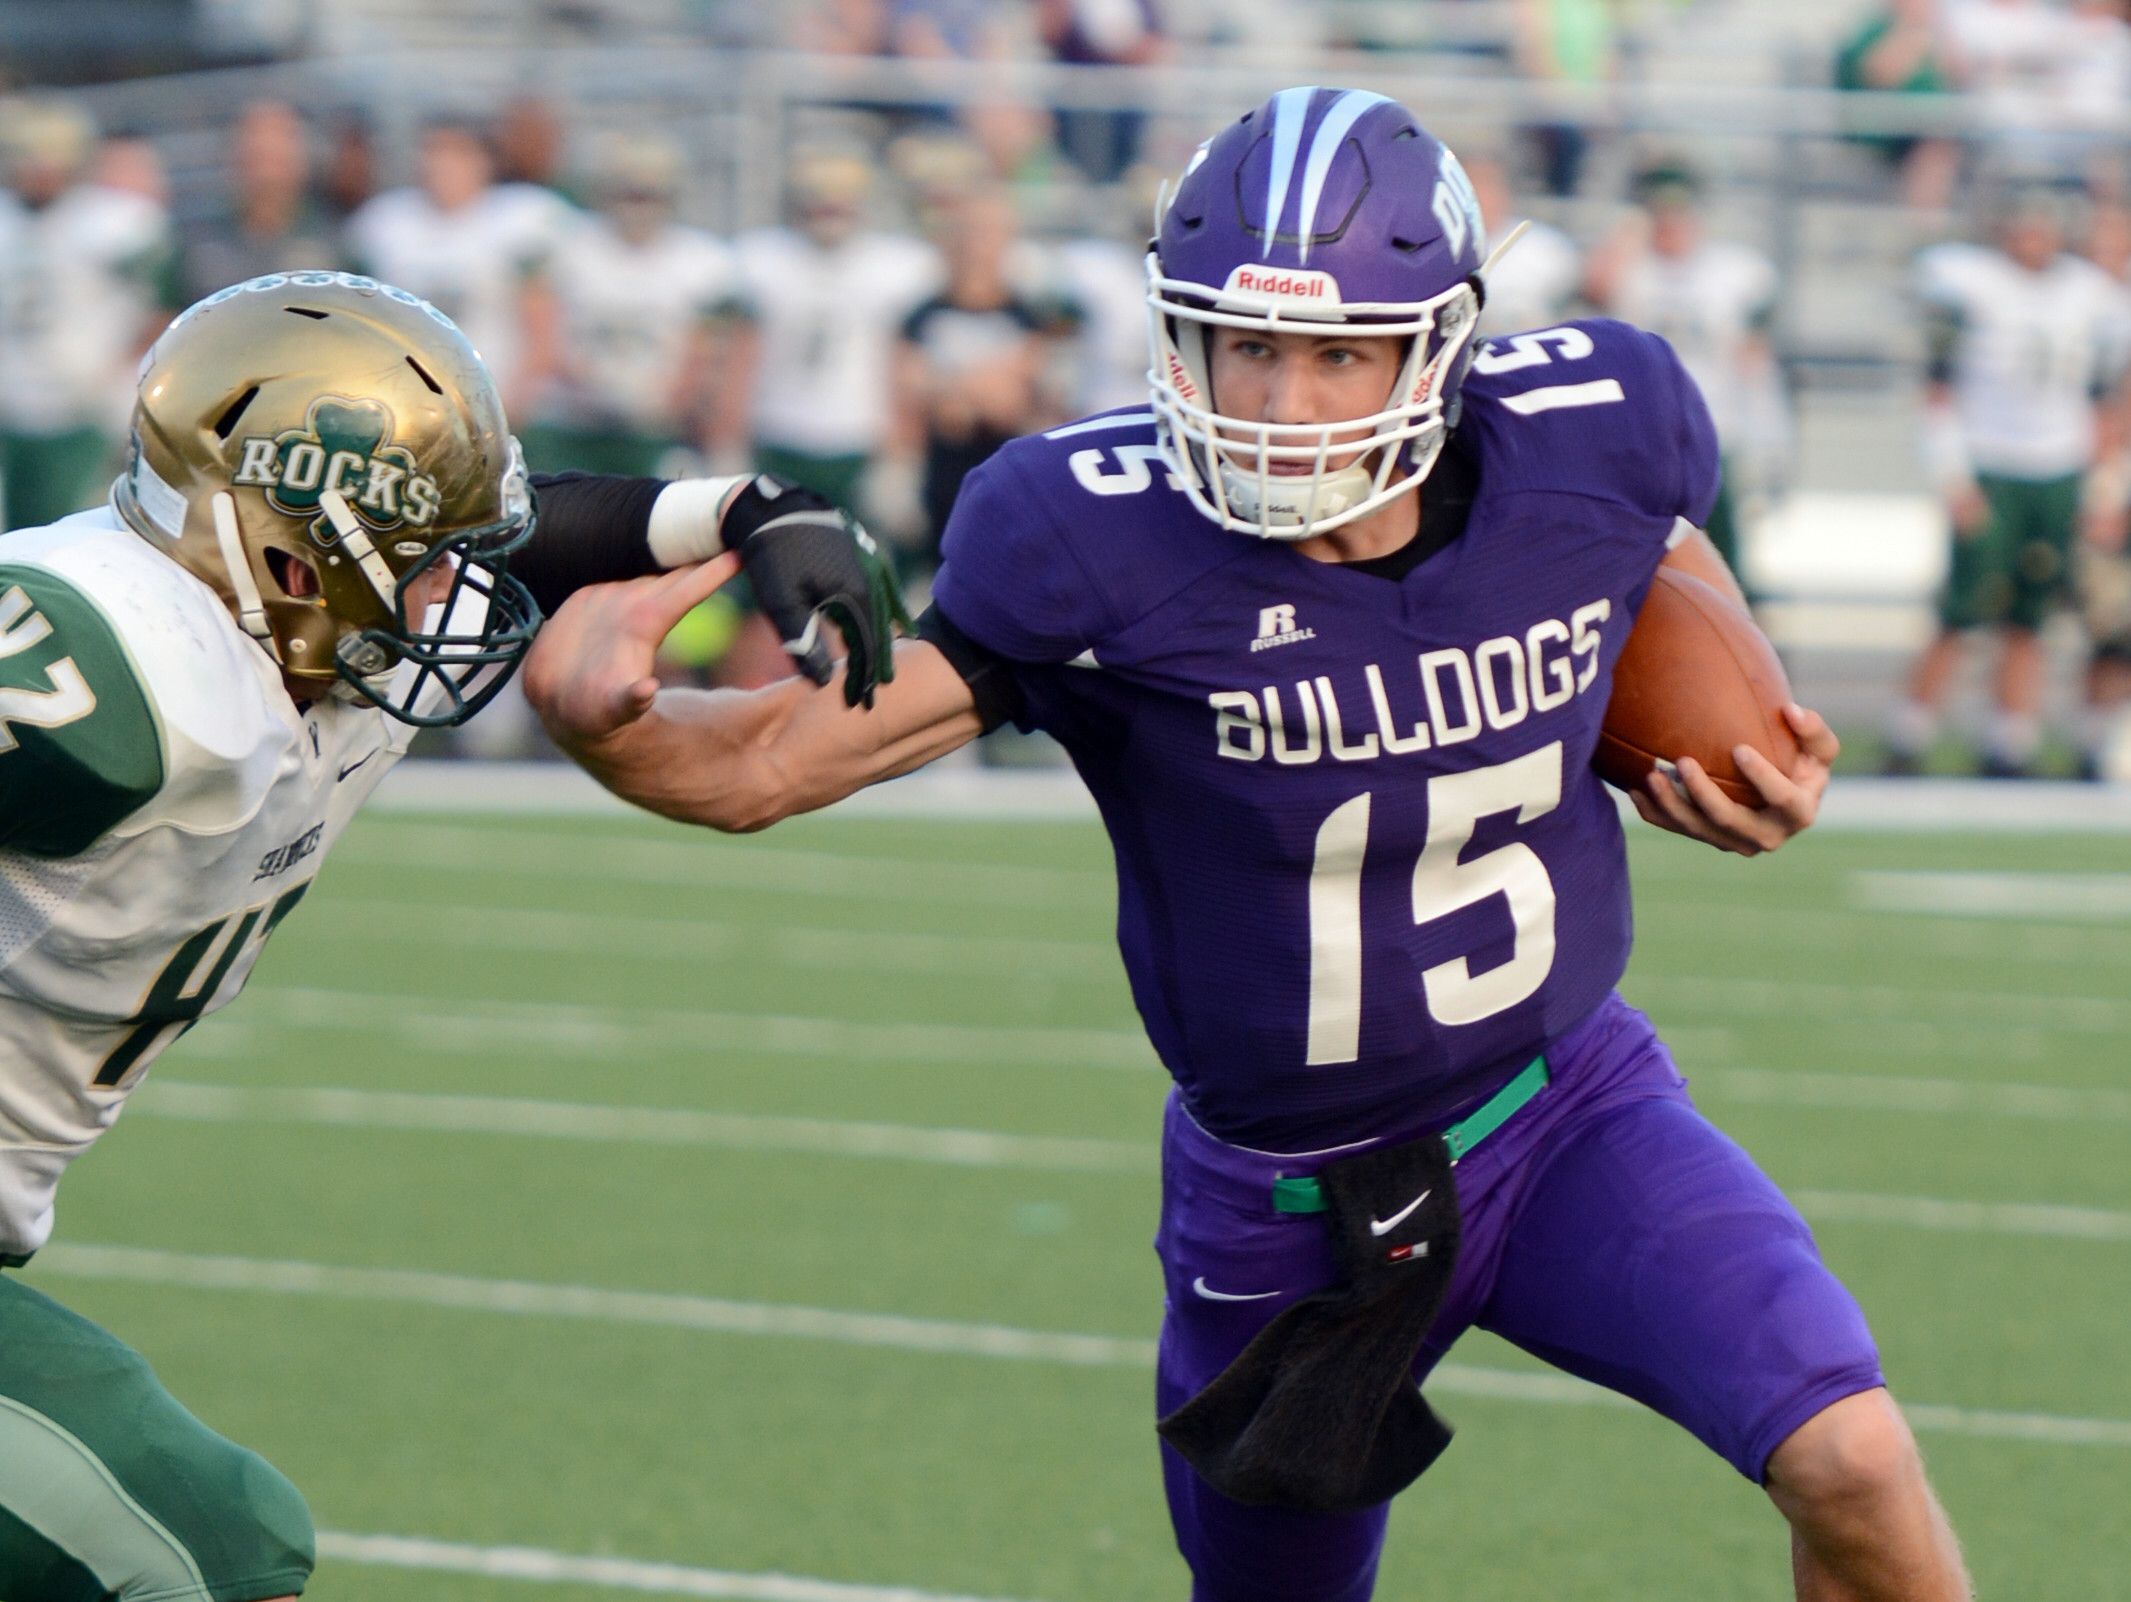 Brownsburg quarterback Hunter Johnson, the homecoming king and Clemson recruit, finished with three passing touchdowns and one rushing touchdown, adding 196 yards passing and 104 rushing yards on 22 carries.